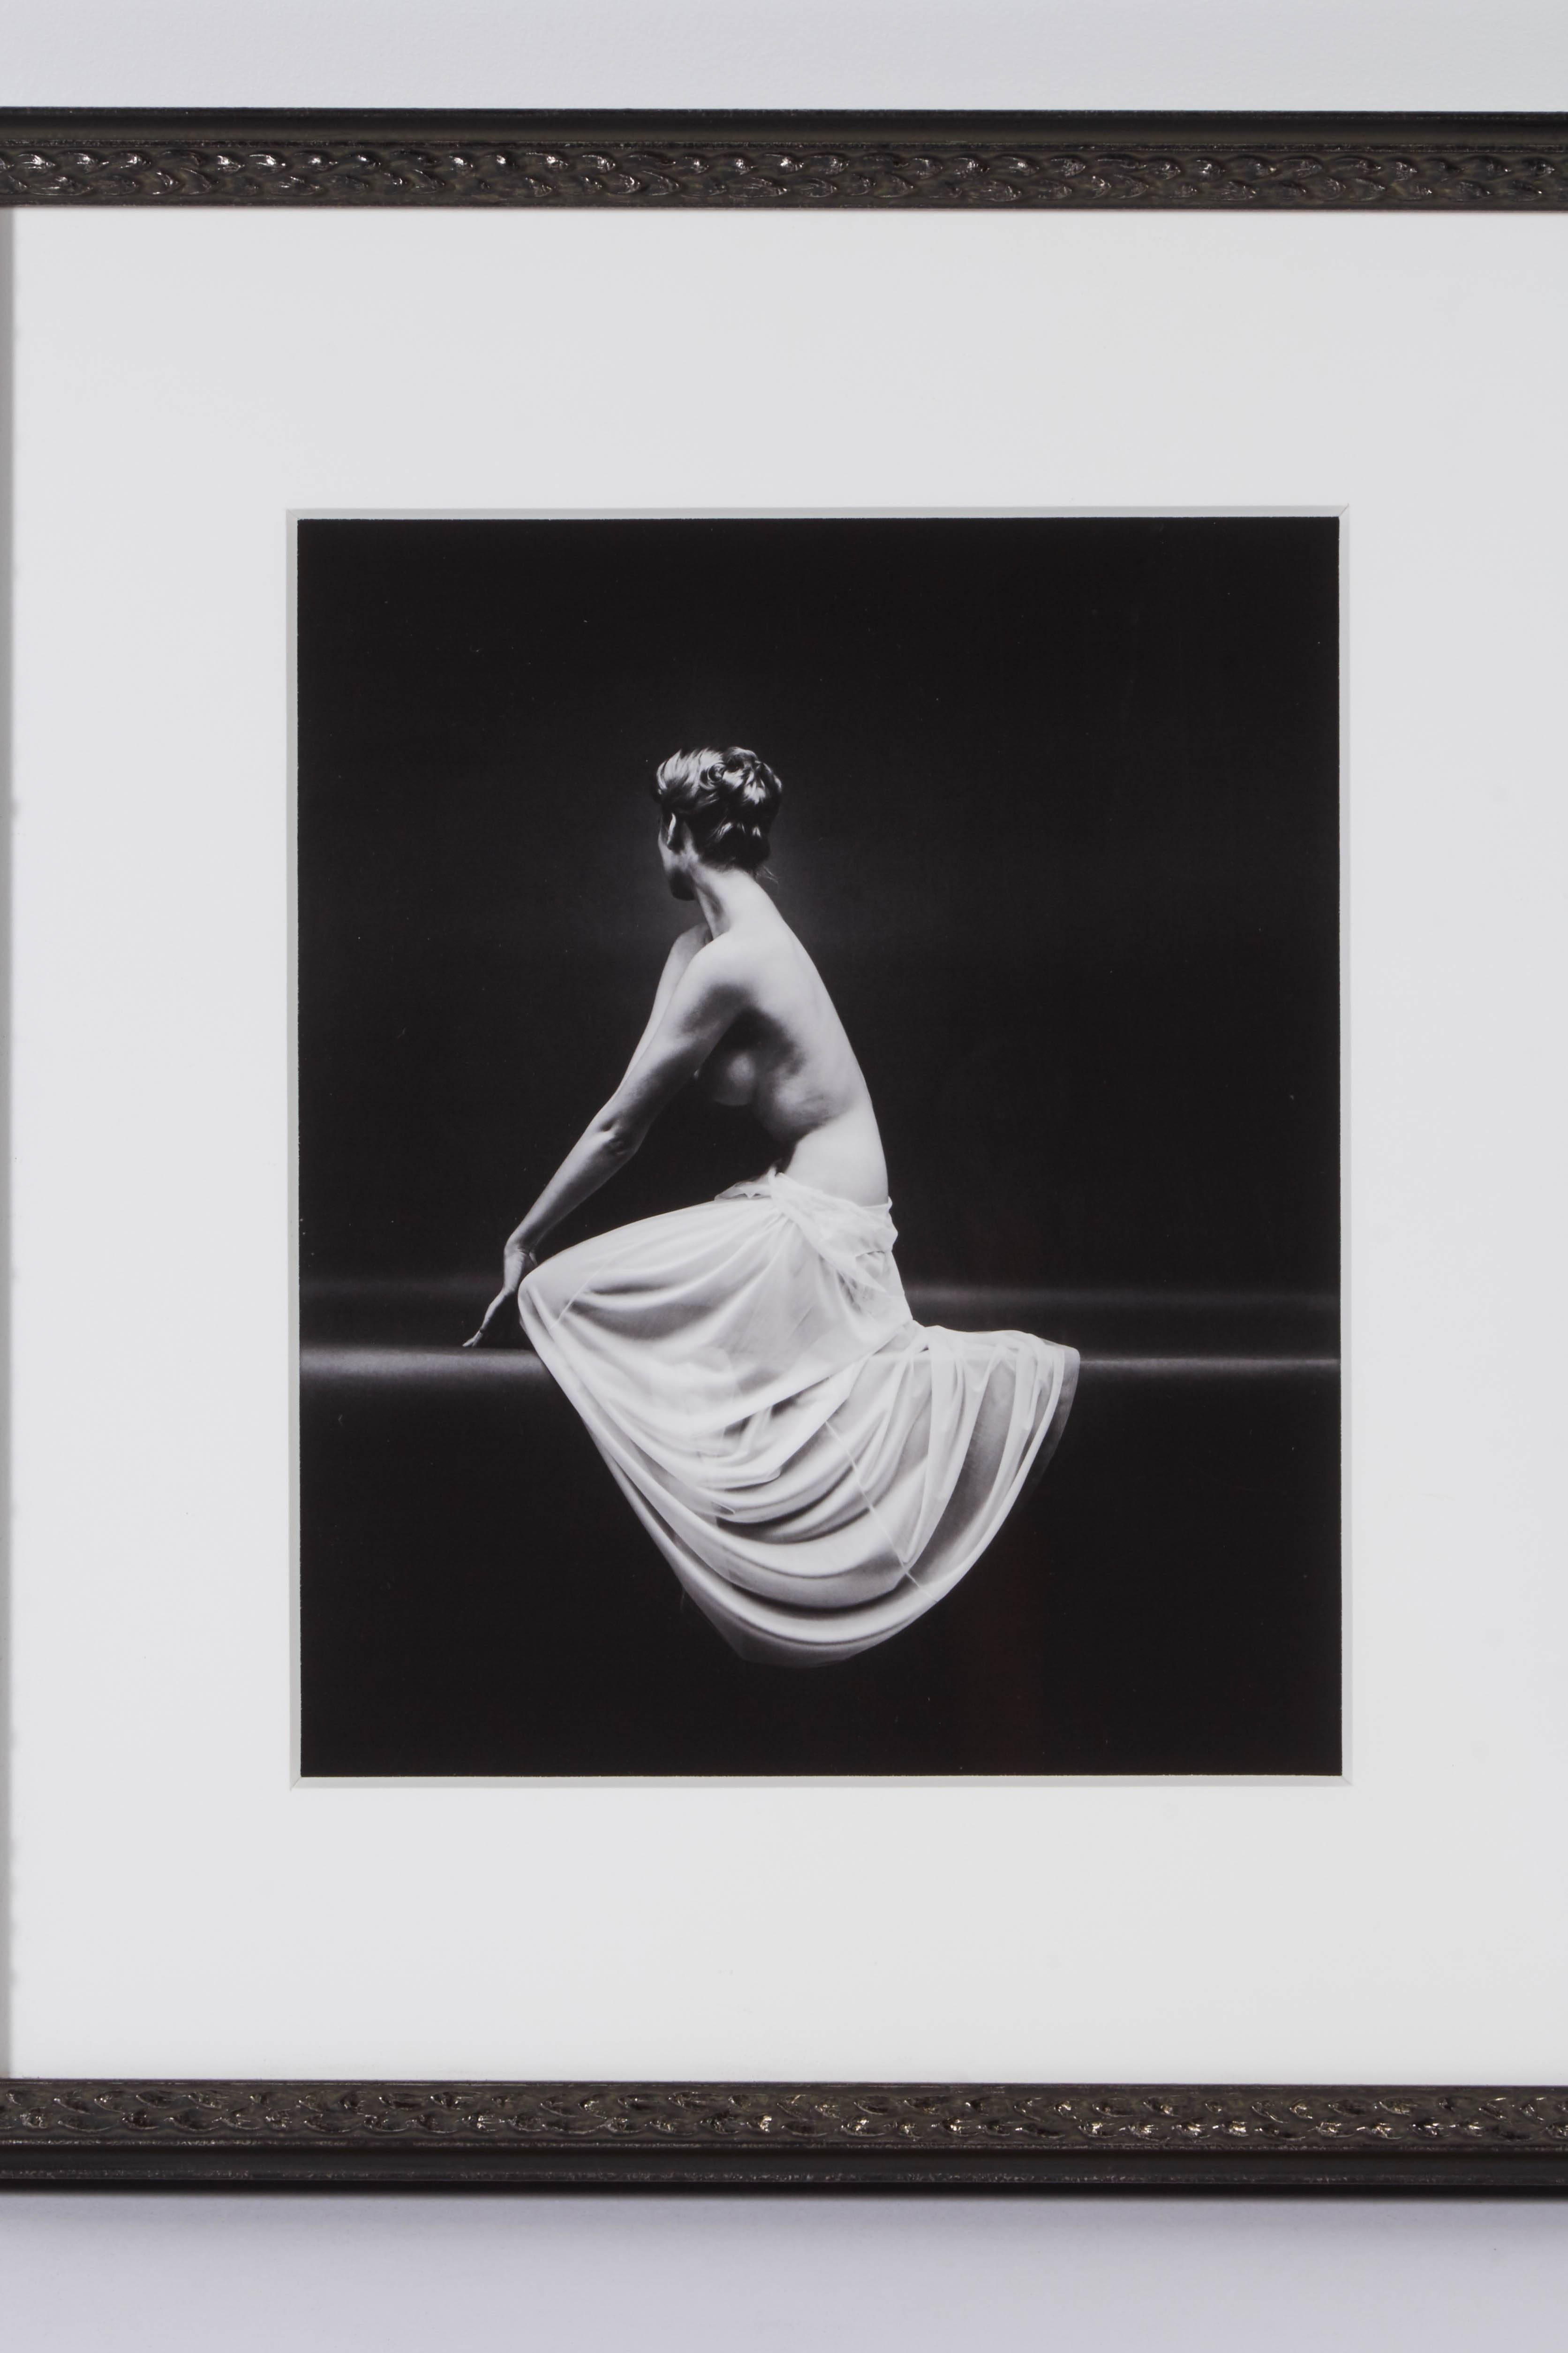 Mark Shaw photographed vanity fair lingerie over the course of ten years for an award winning advertising campaign.

Posthumous giclee (digital) print from the original negative, presumably from an edition of 15-30 and presumably signed and